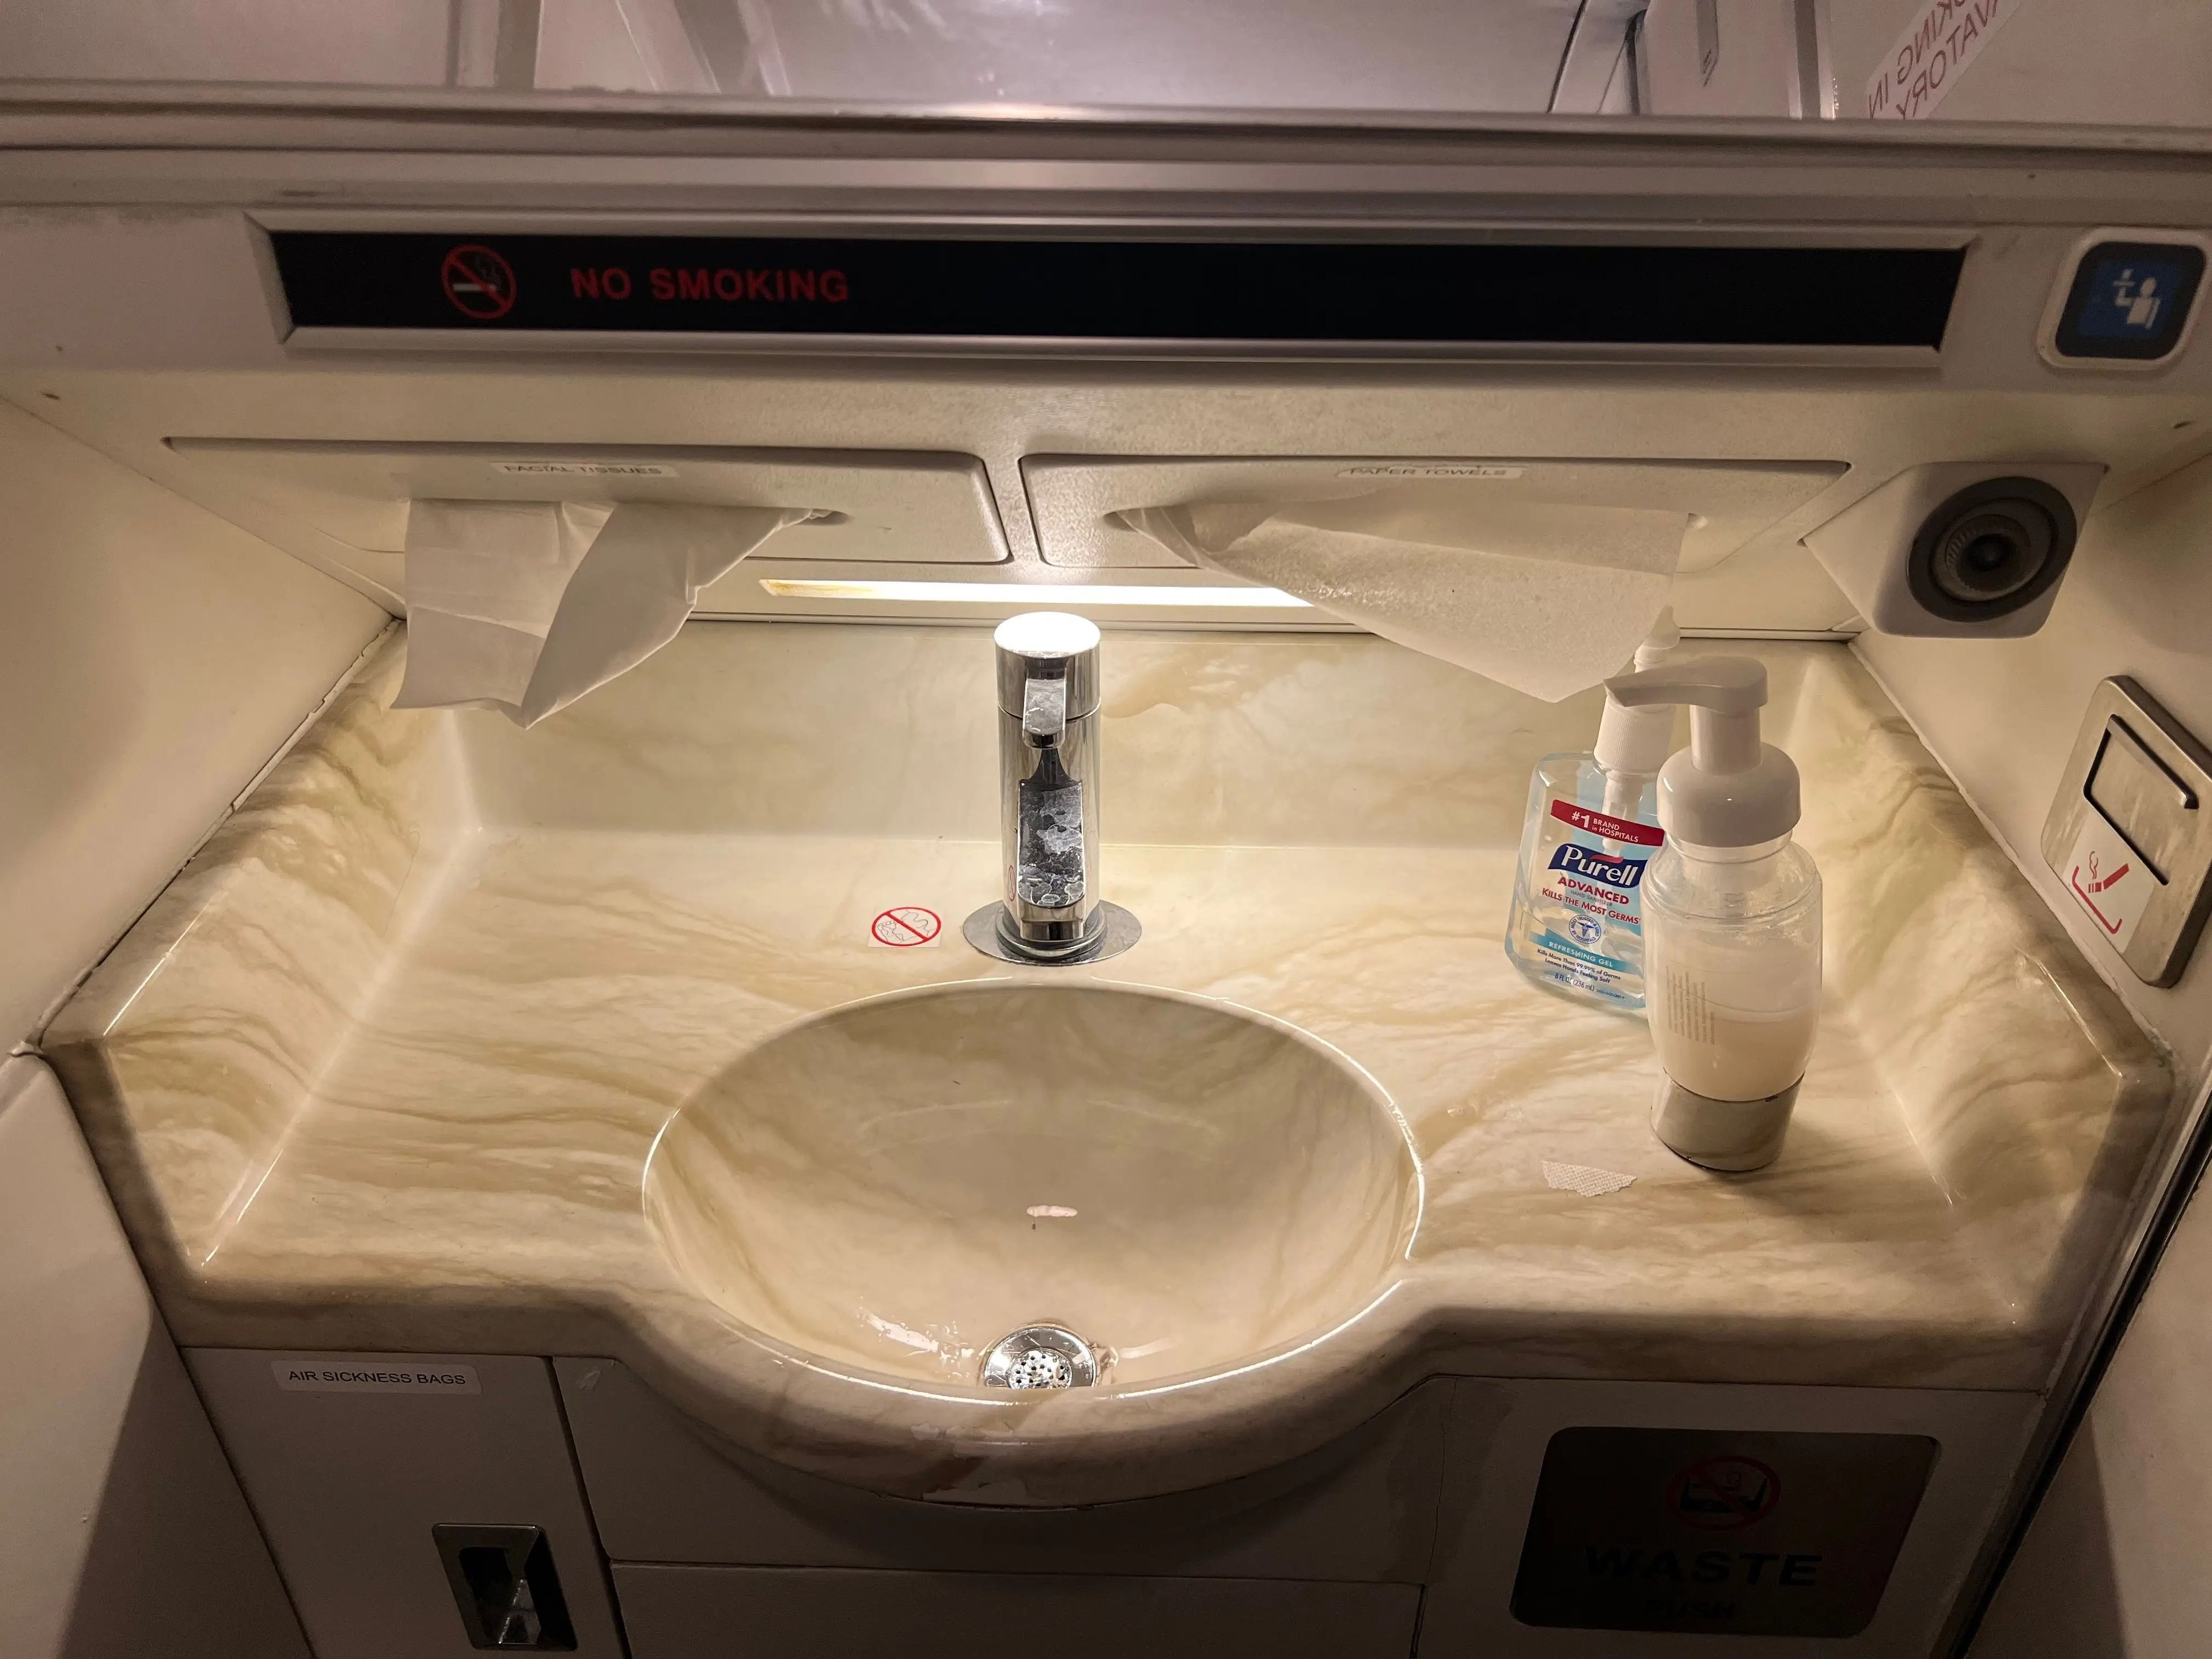 The marble-colored sink onboard the JSX plane.